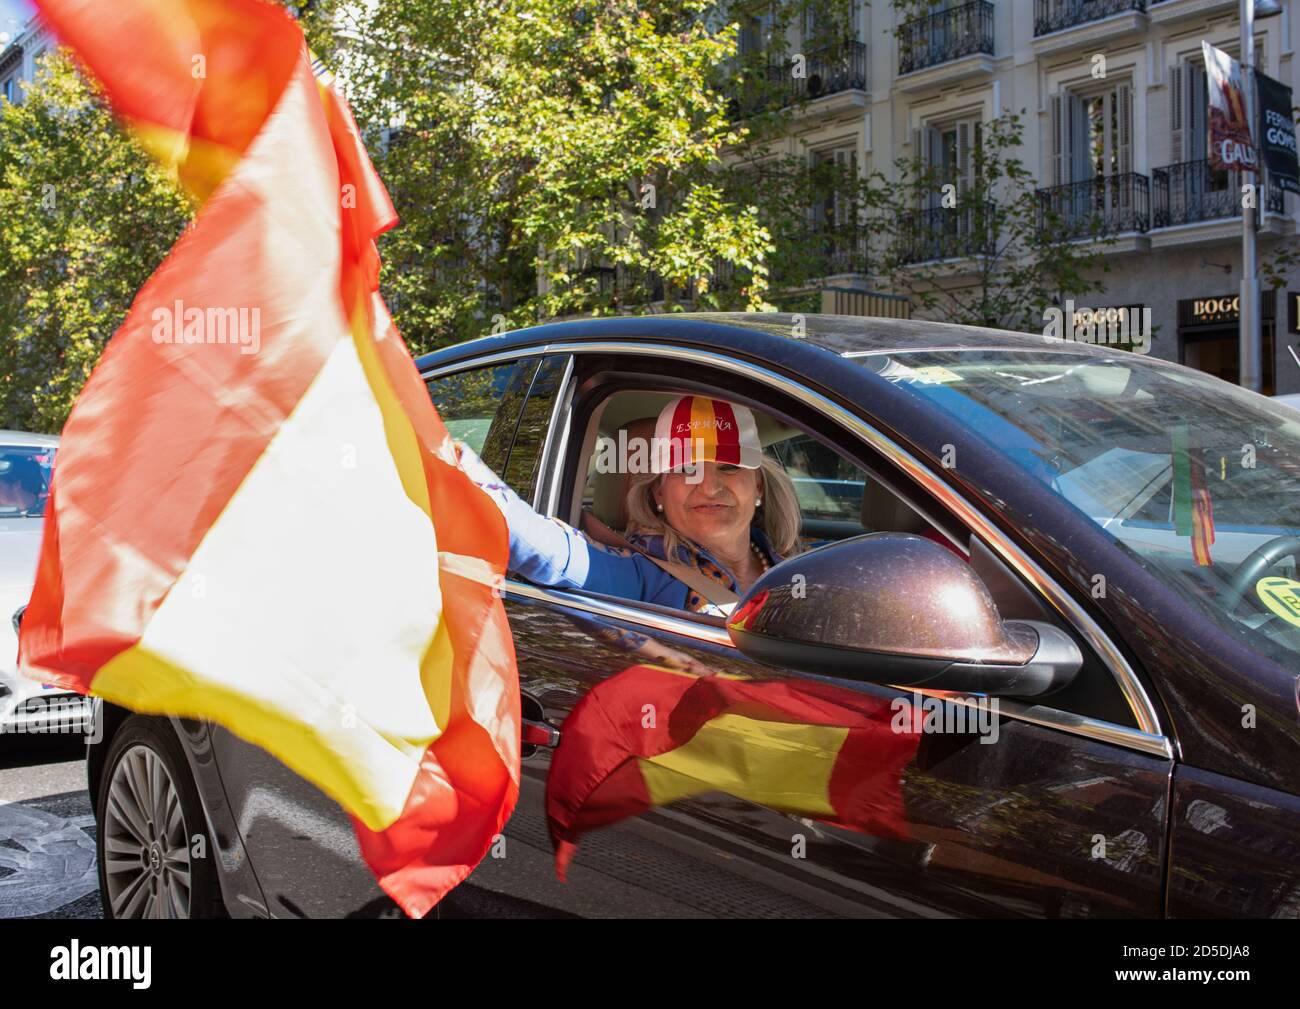 Madrid, Spain, 12th oct 2020. Woman posing with flag as she attends a car parade protest against Spanish government's handling of the COVID-19 crisis. Stock Photo